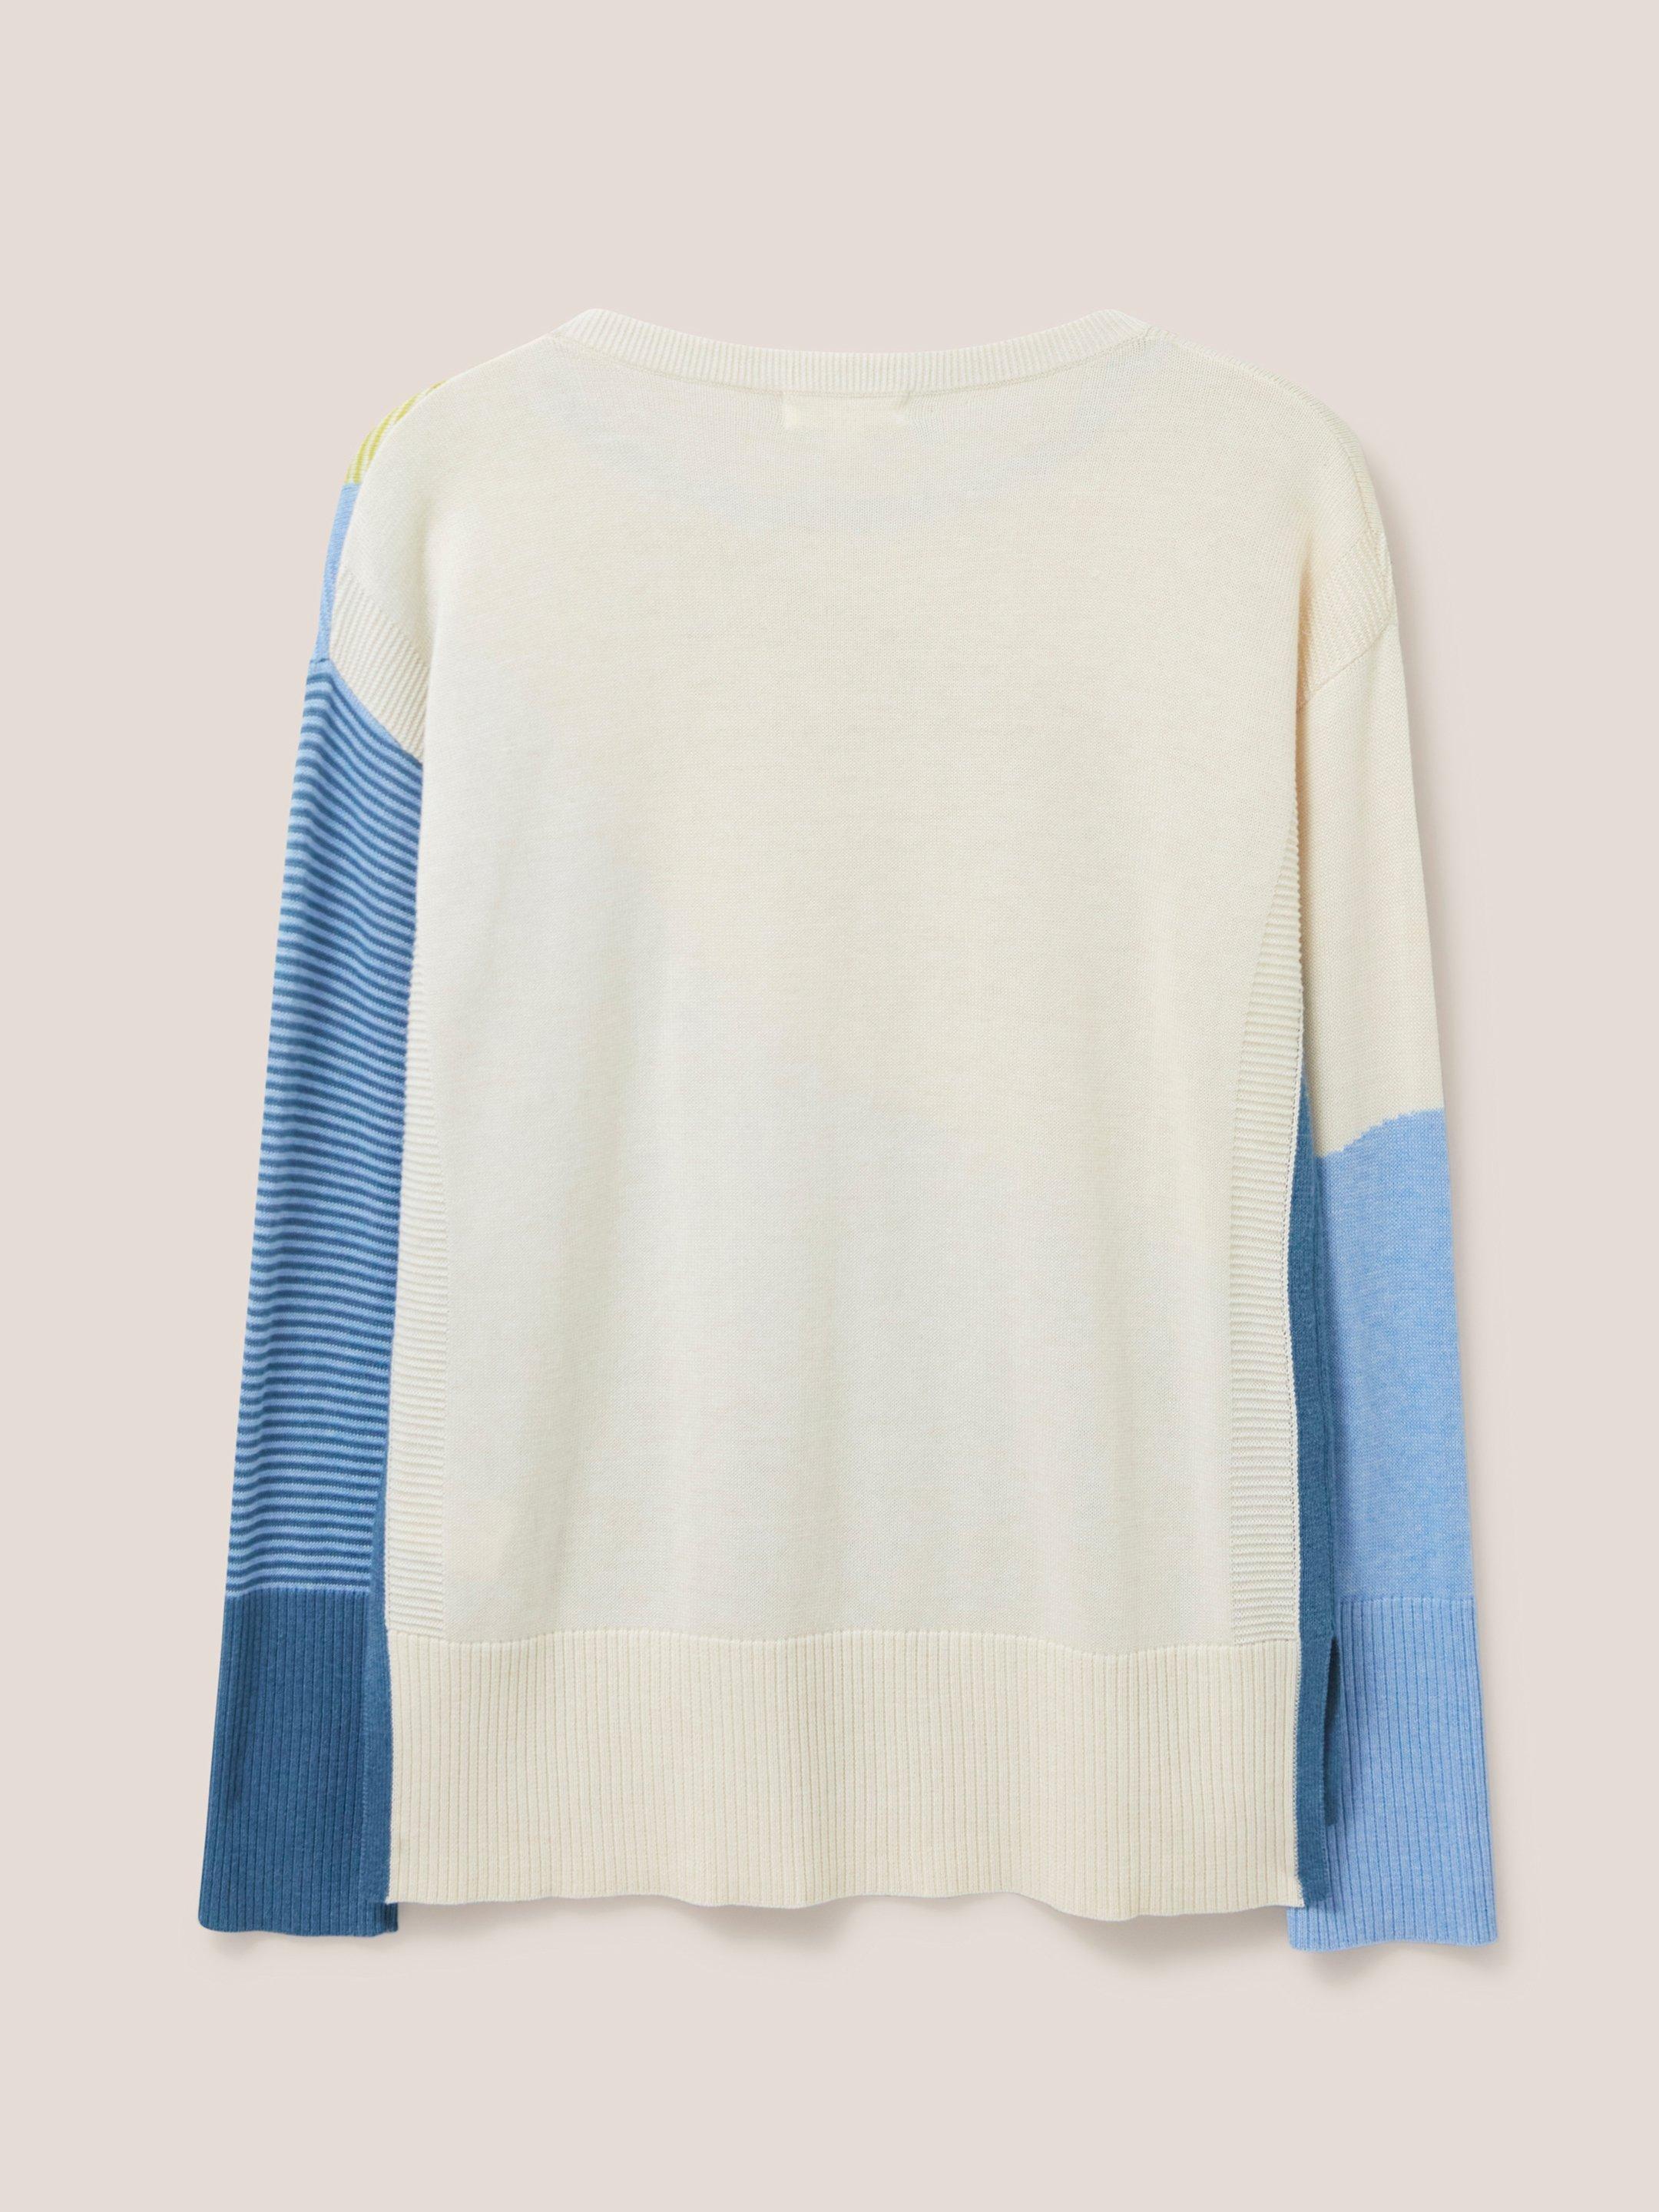 OLIVE ABSTRACT JUMPER  in BLUE MLT - FLAT BACK